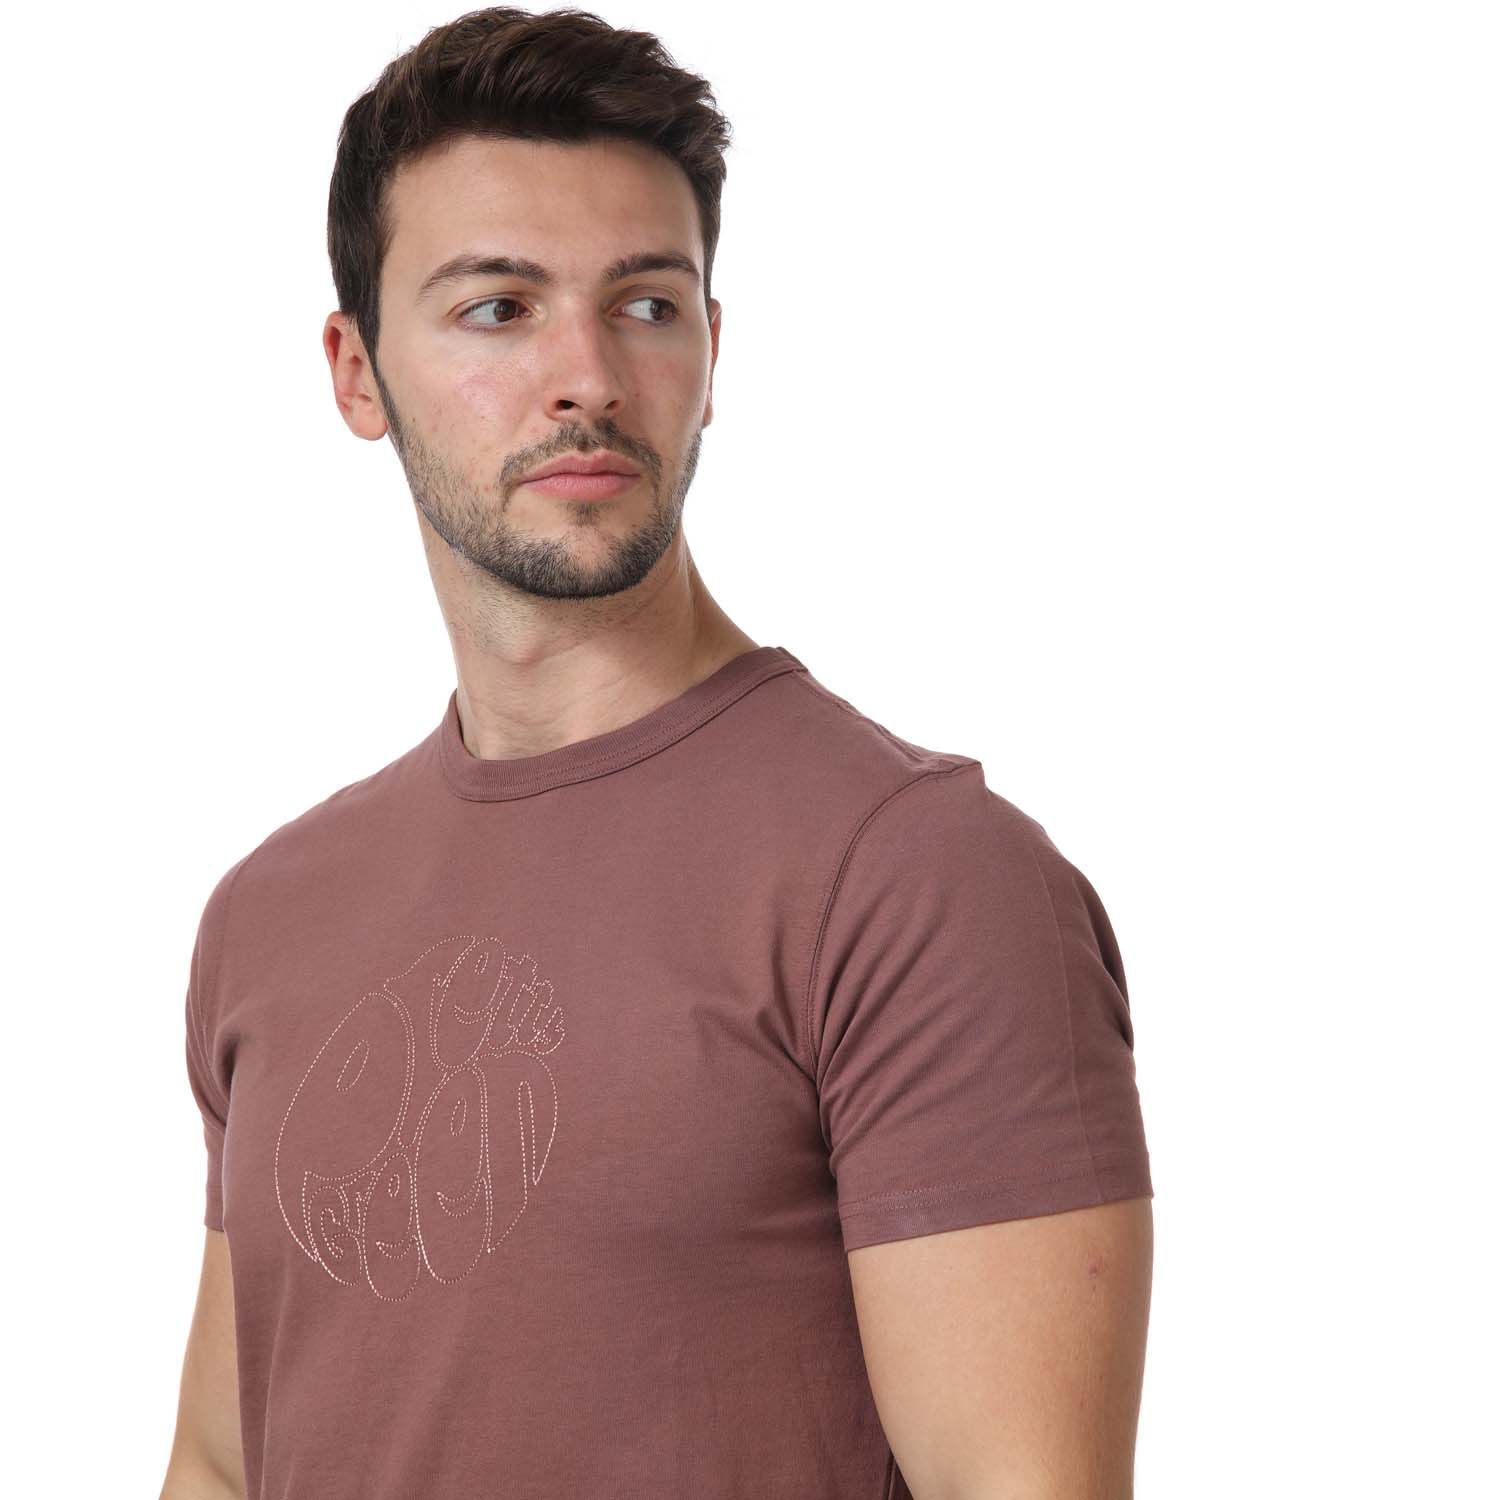 Mens Pretty Green Minoris Logo T- Shirt in burgundy.- Ribbed crew neckline.- Short sleeves.- Signature Pretty Green logo is embroidered on the chest.- Slim fit.- 100% Organic Cotton.- Ref: G21Q3MUJER907B